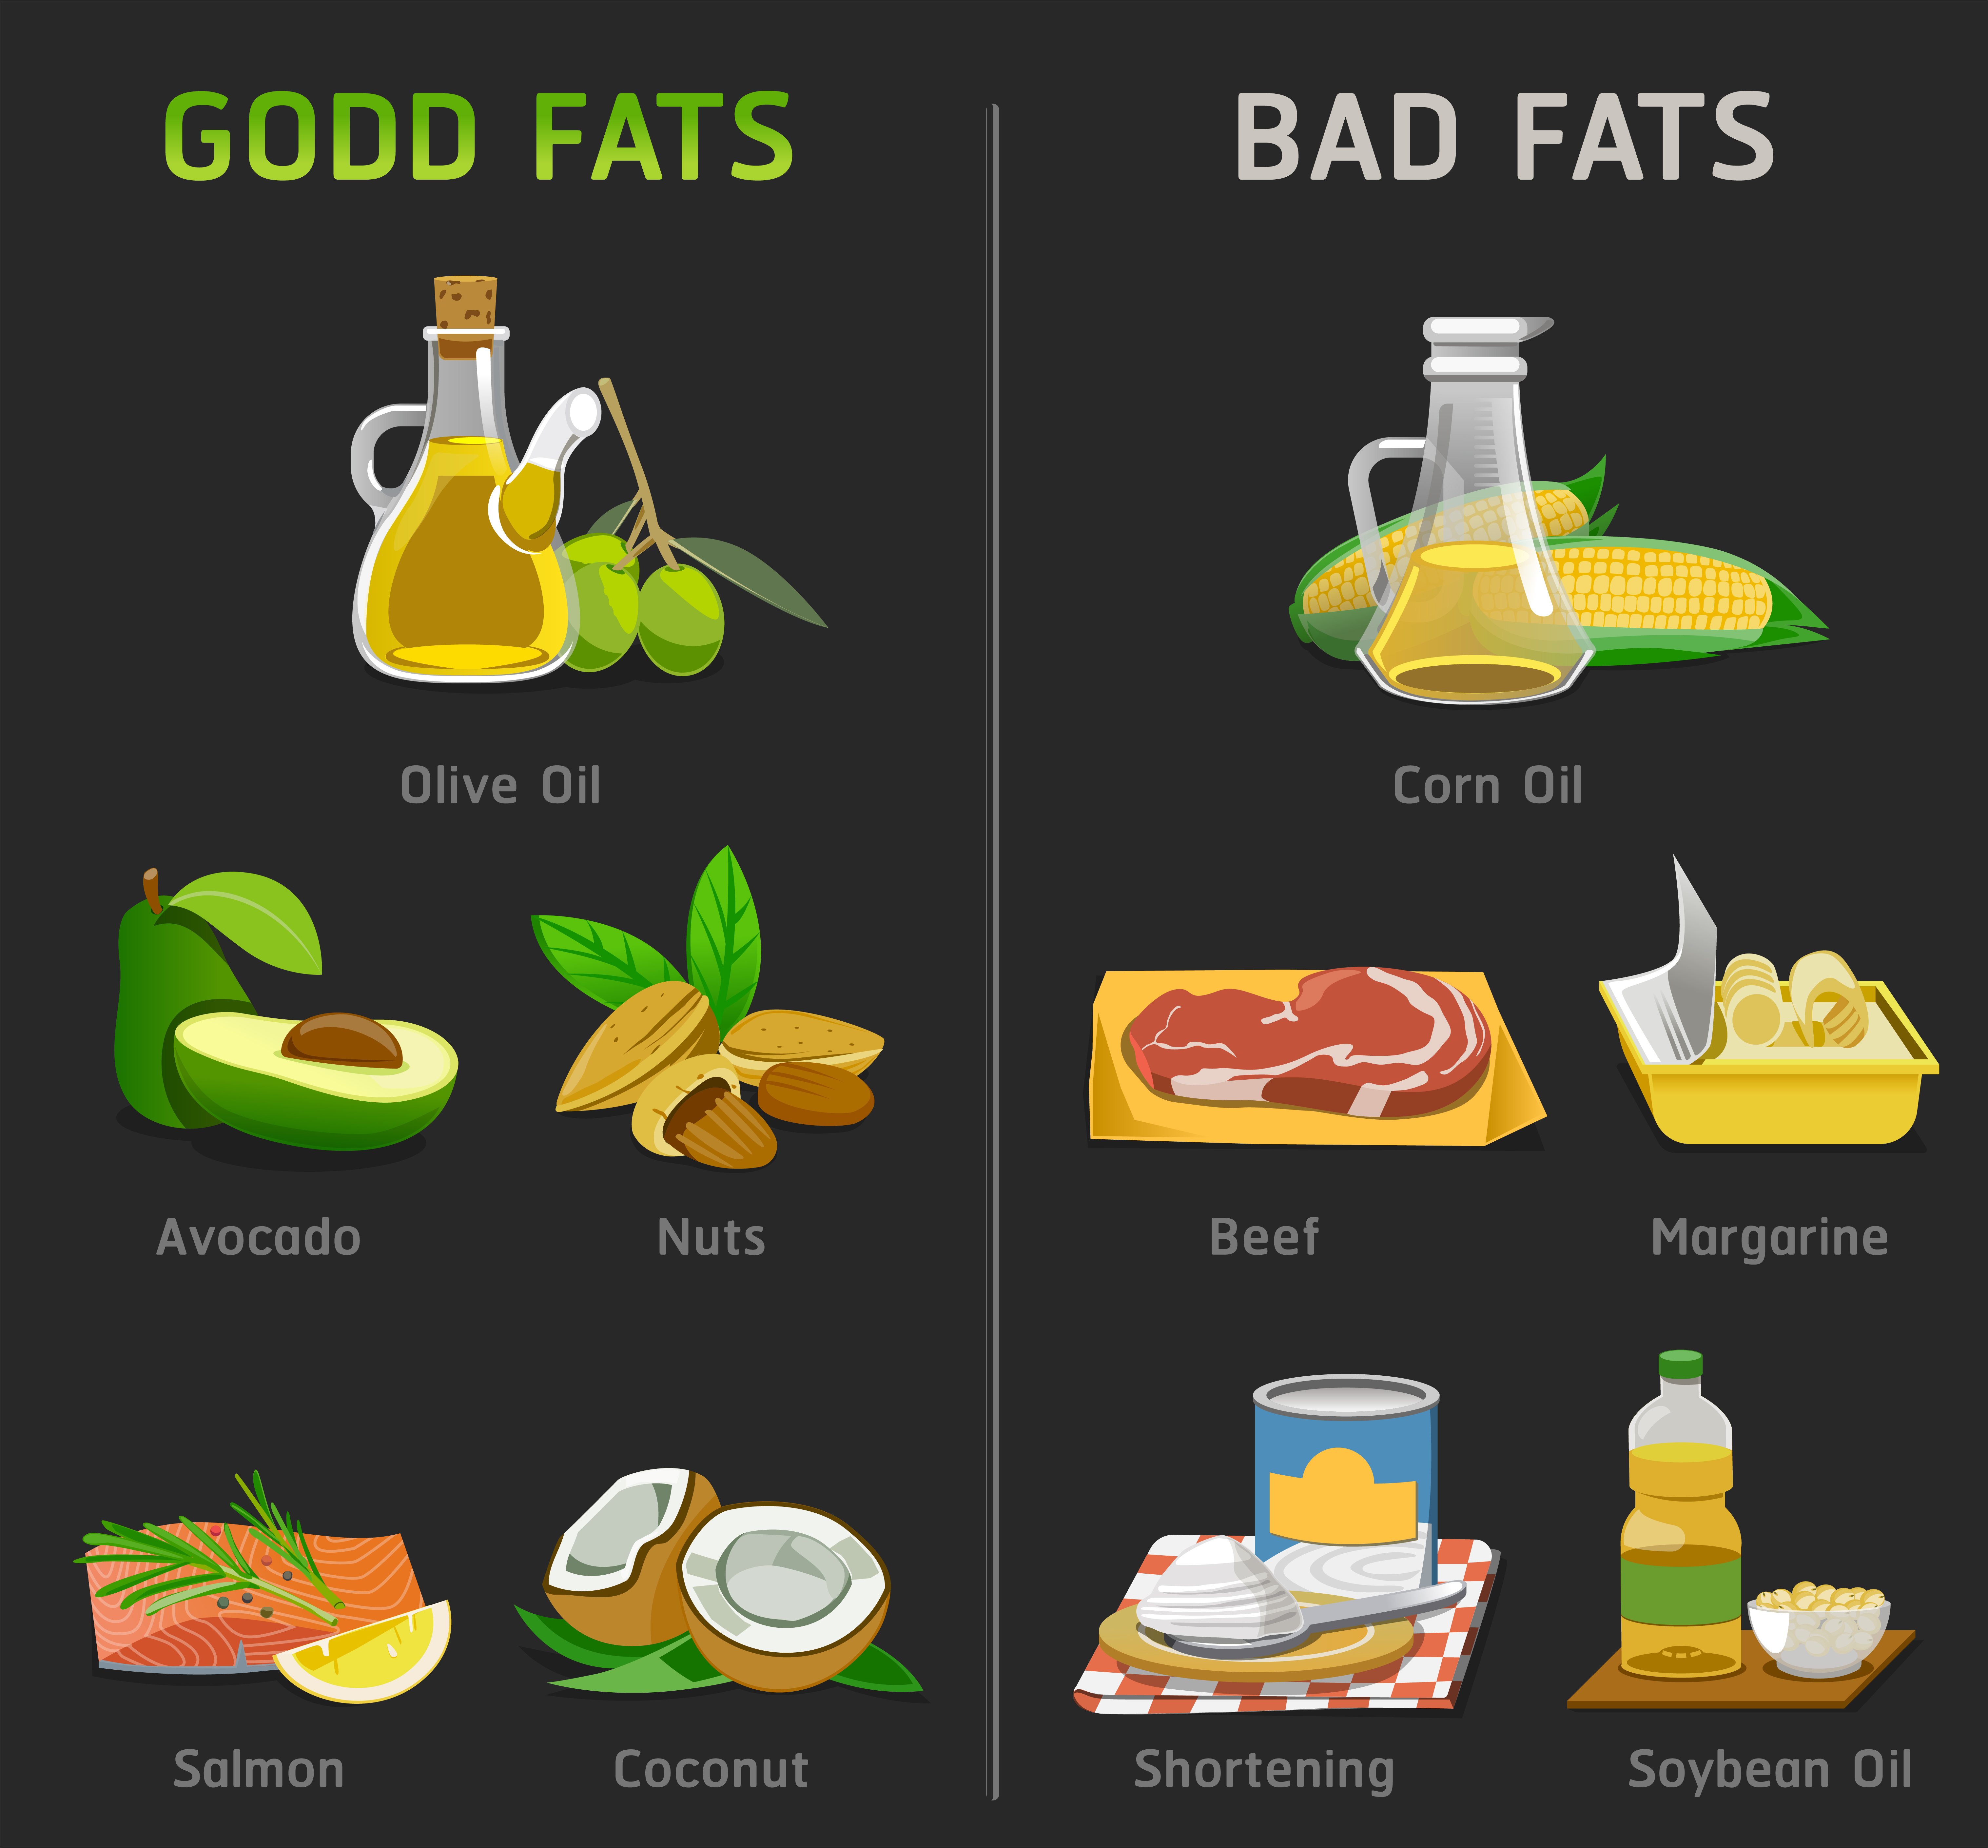 We can group fats in two groups: Good Fats, mainly from vegetables, and Bad Fat - mainly saturated, animal fats